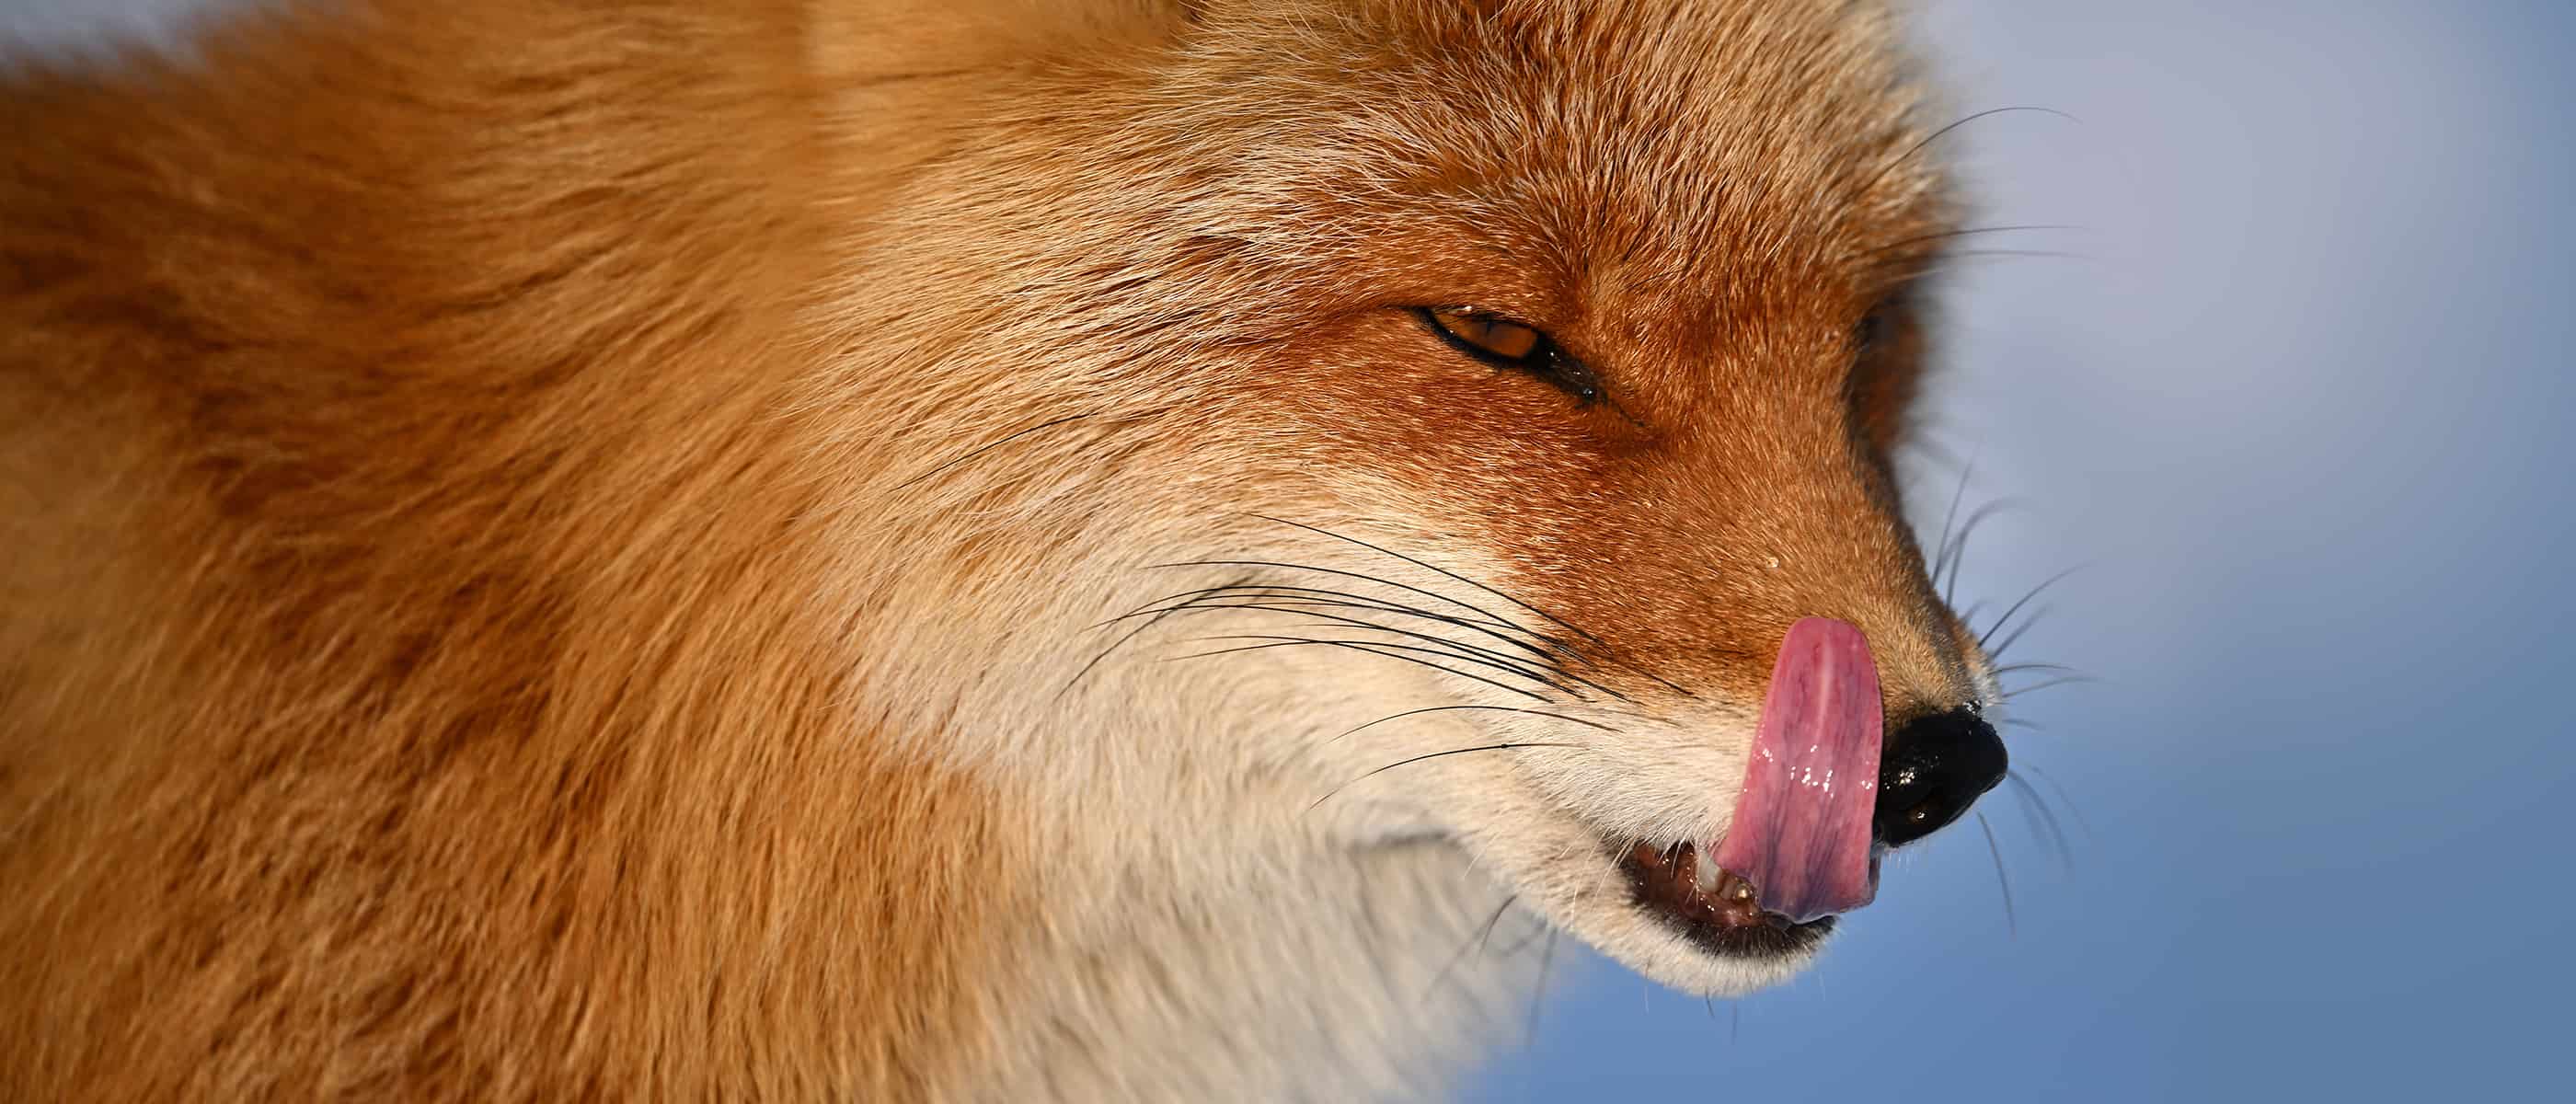 Photo of a fox, close up, taken with the NIKKOR Z 400mm f/4.5 VR S lens